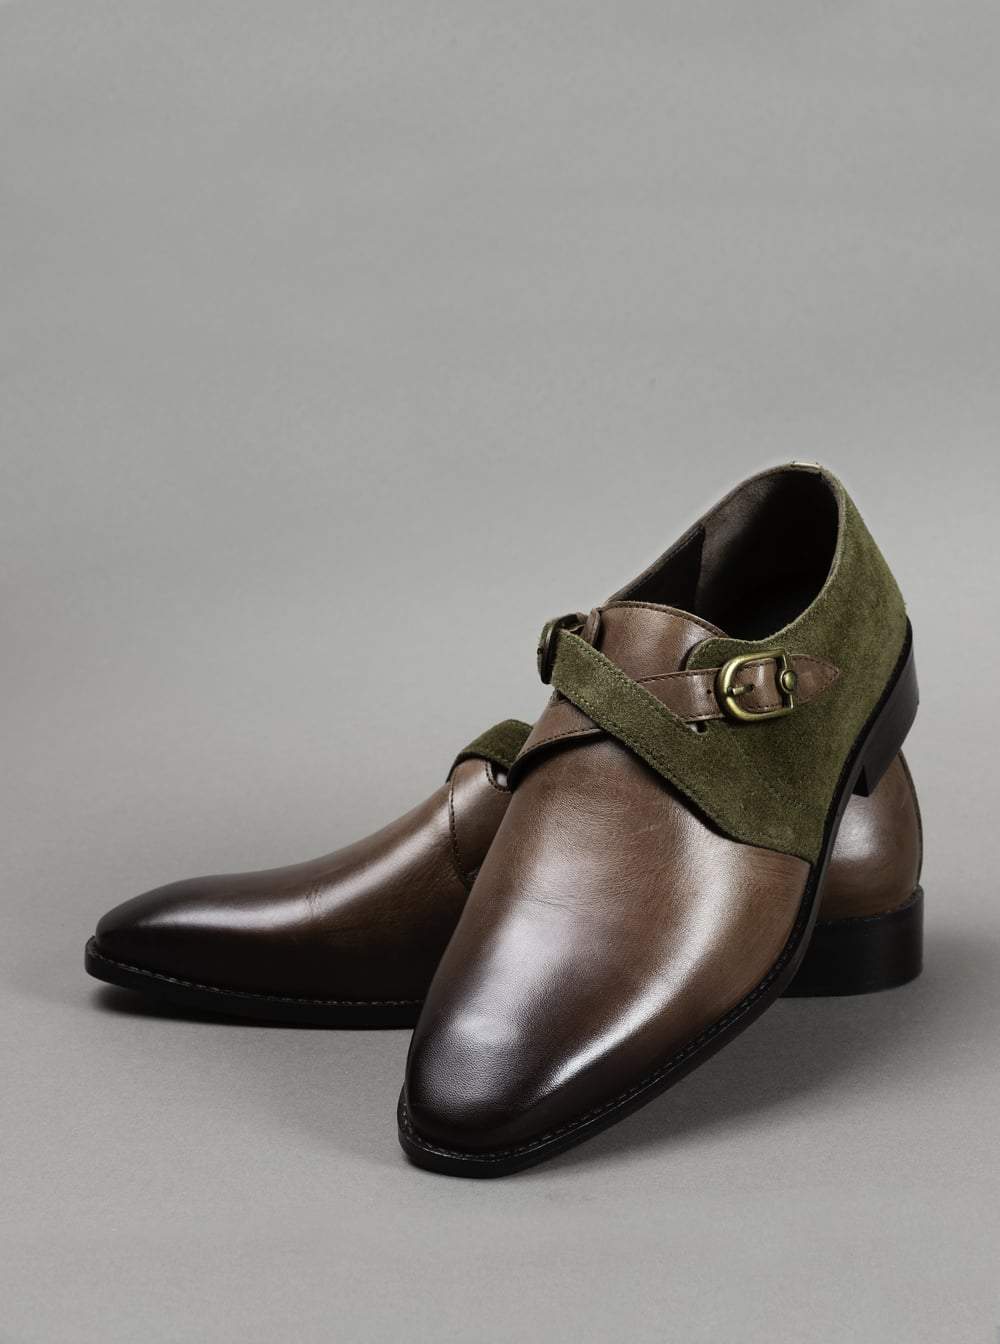 Wine And Olive Green Bespoke Shoes